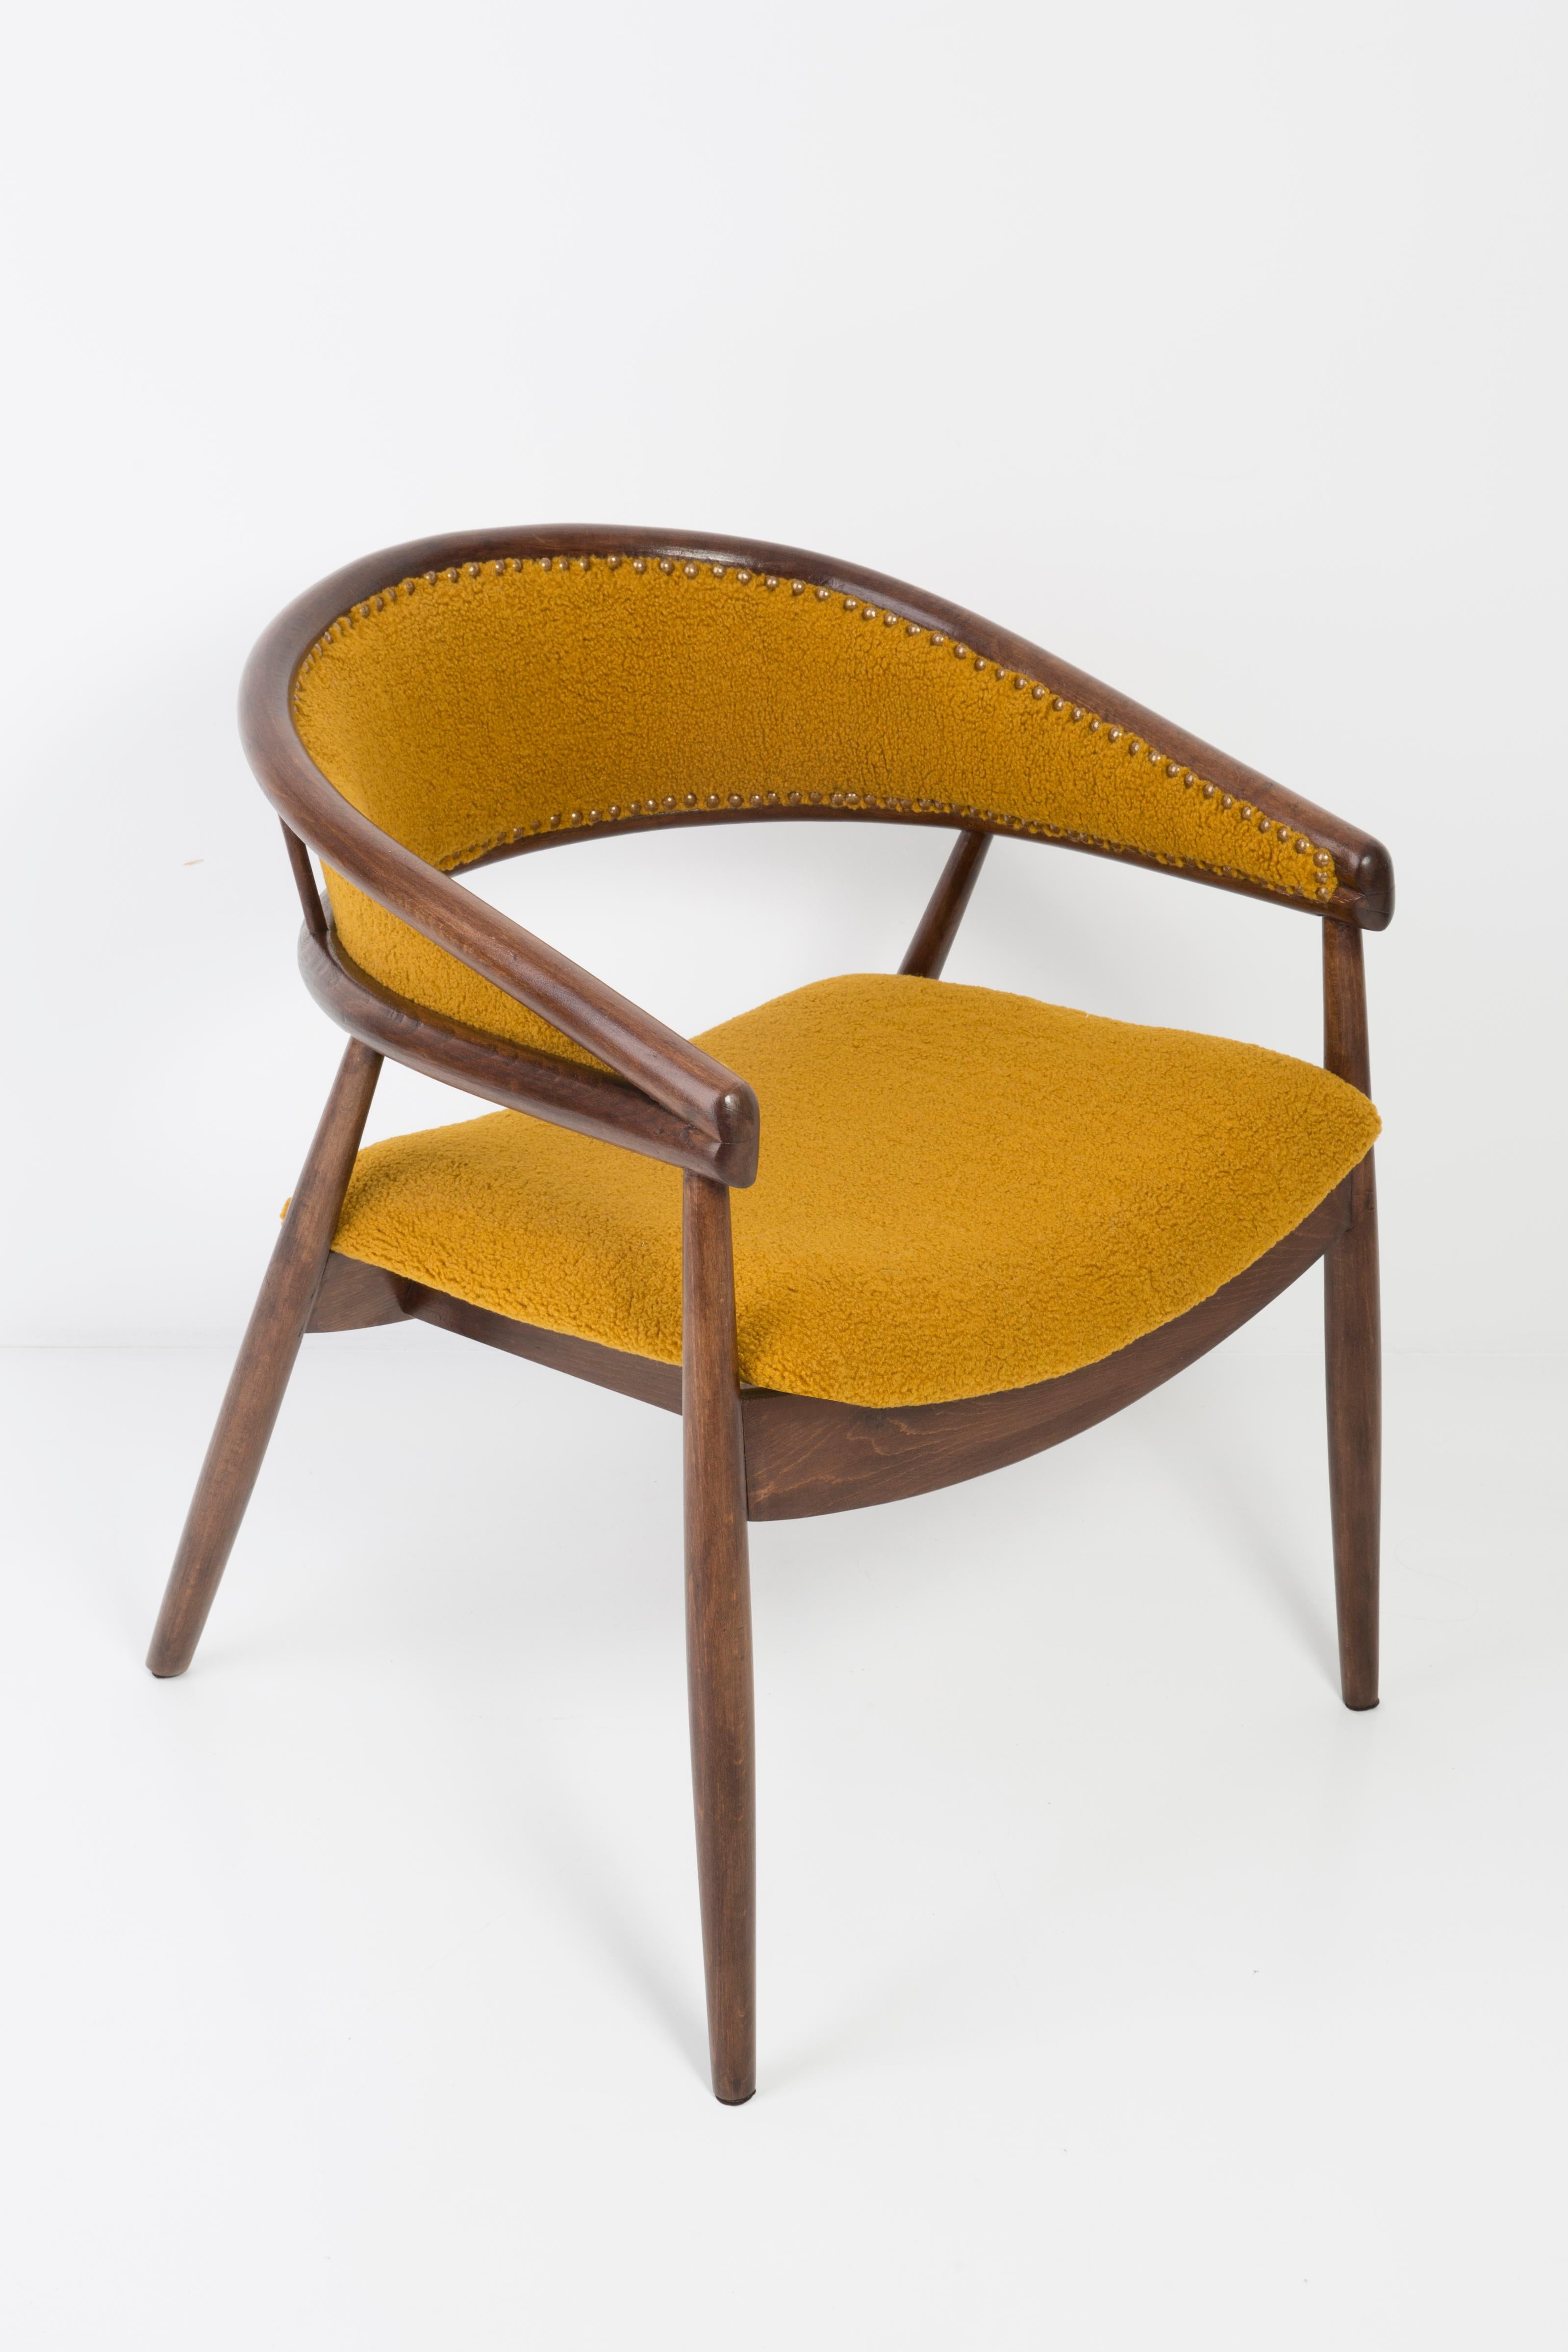 Hand-Crafted Set of Two James Mont Bent Beech Armchairs, Yellow Ochra Boucle, 1960s For Sale